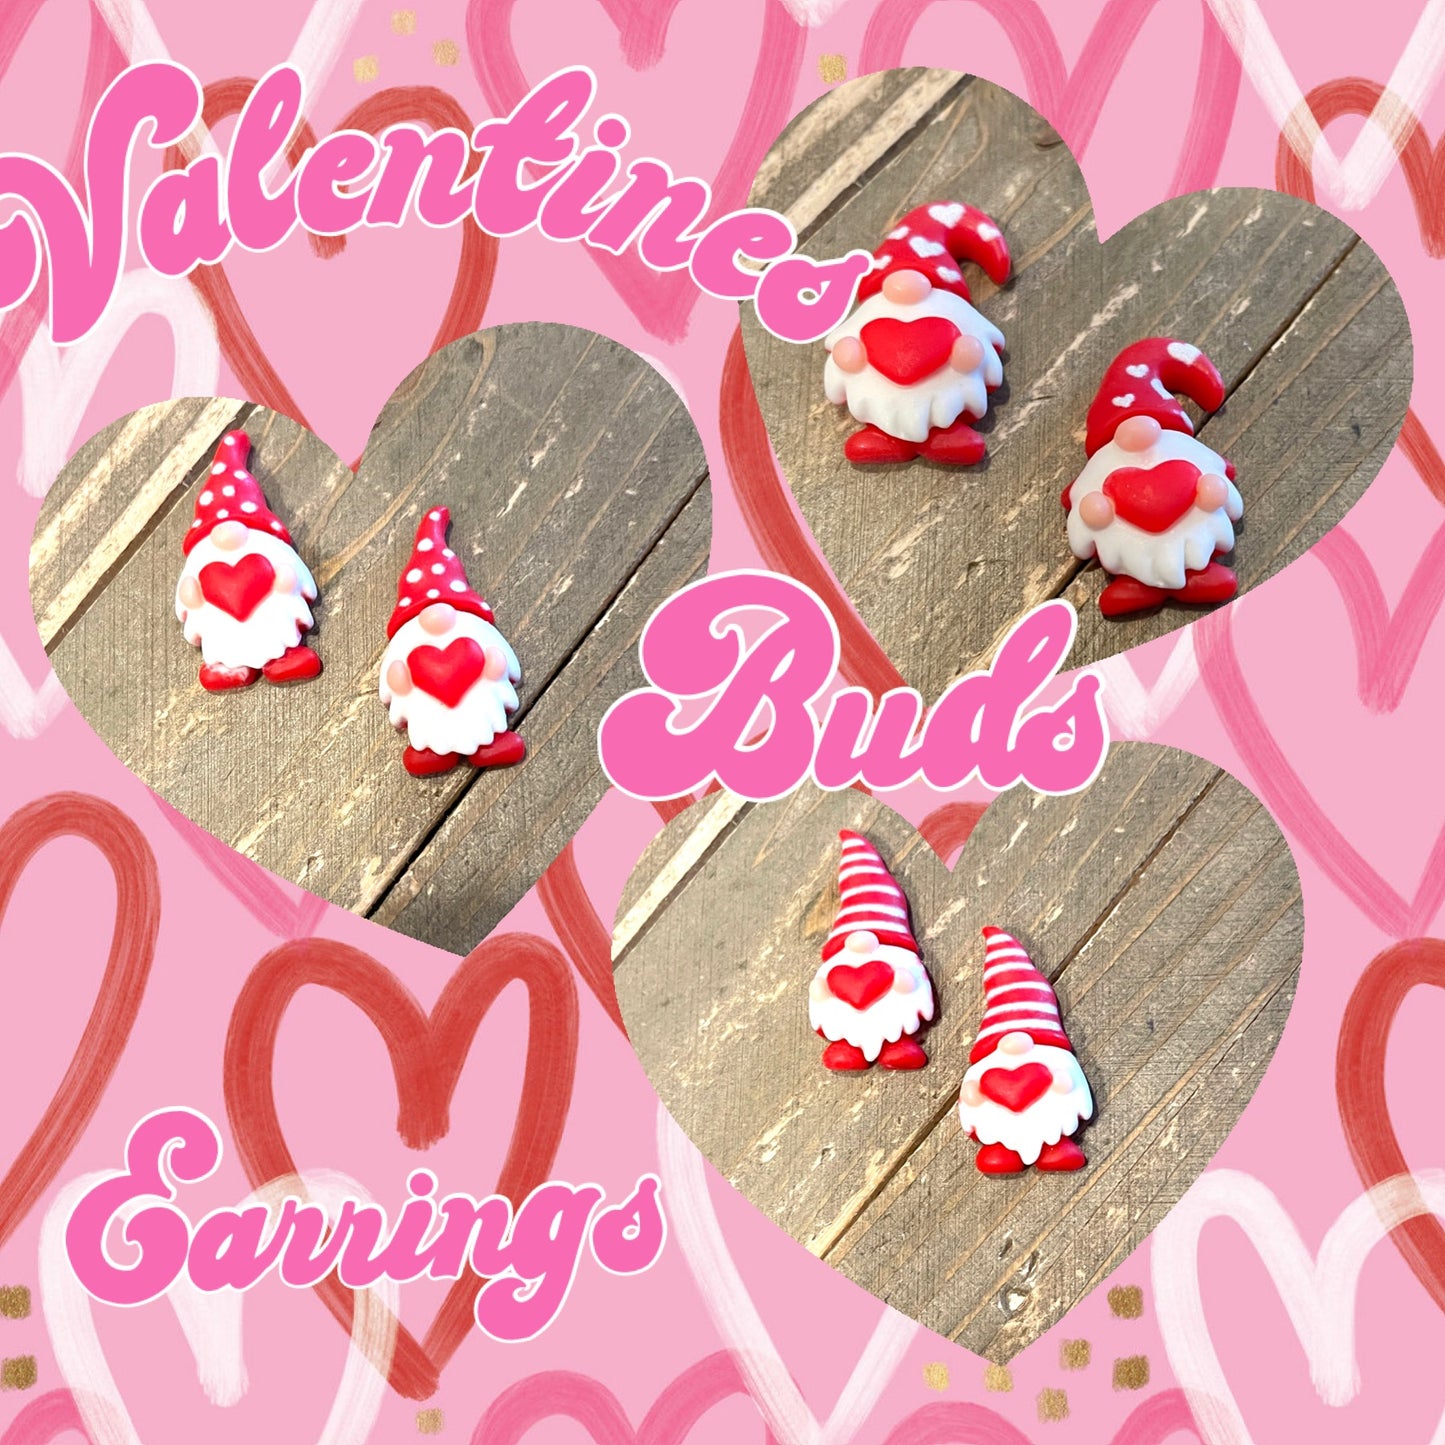 Valentine Buds-Love Gnomes Stud Earrings (3 to choose from)